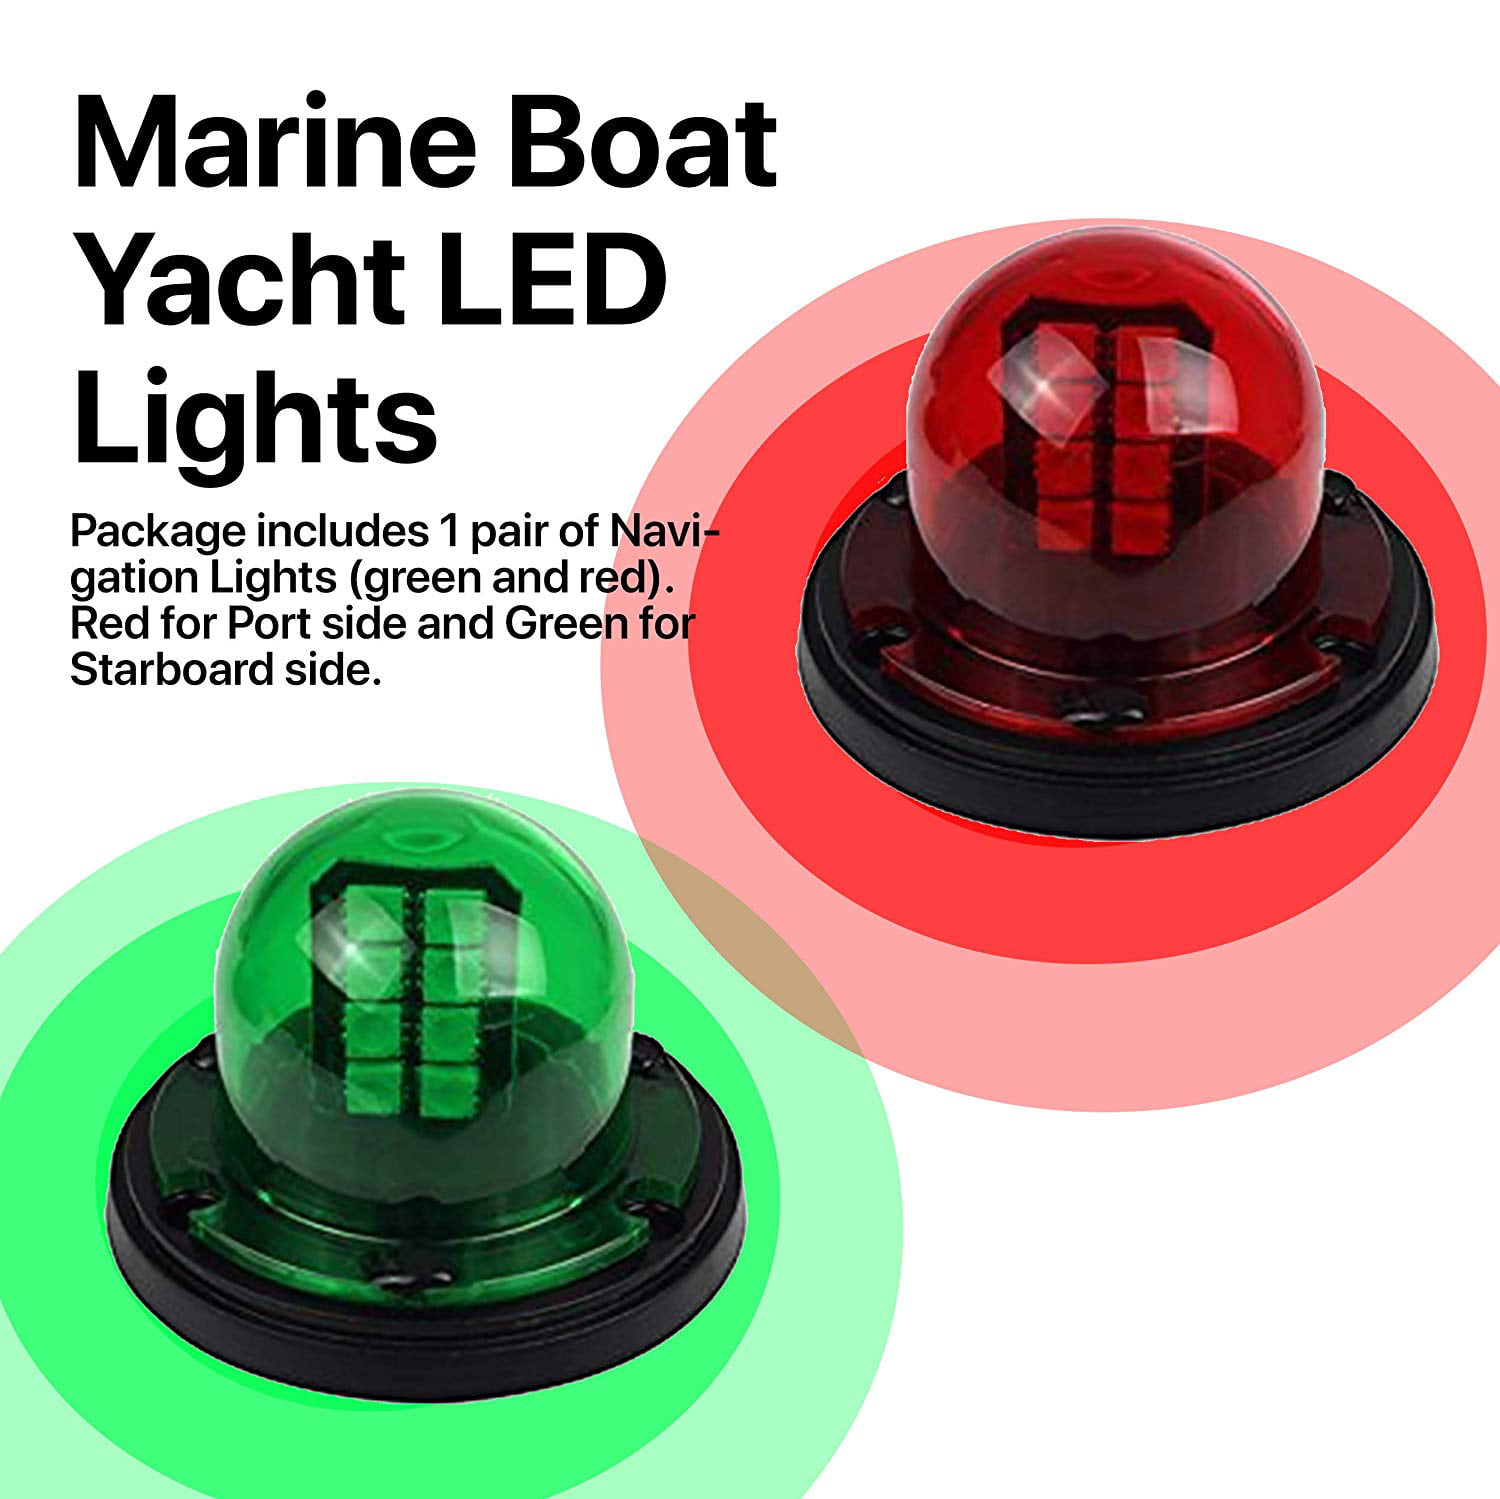 TruWire 12V Led Boat Navigation Lights with Stainless Steel Covers, 1 Pair